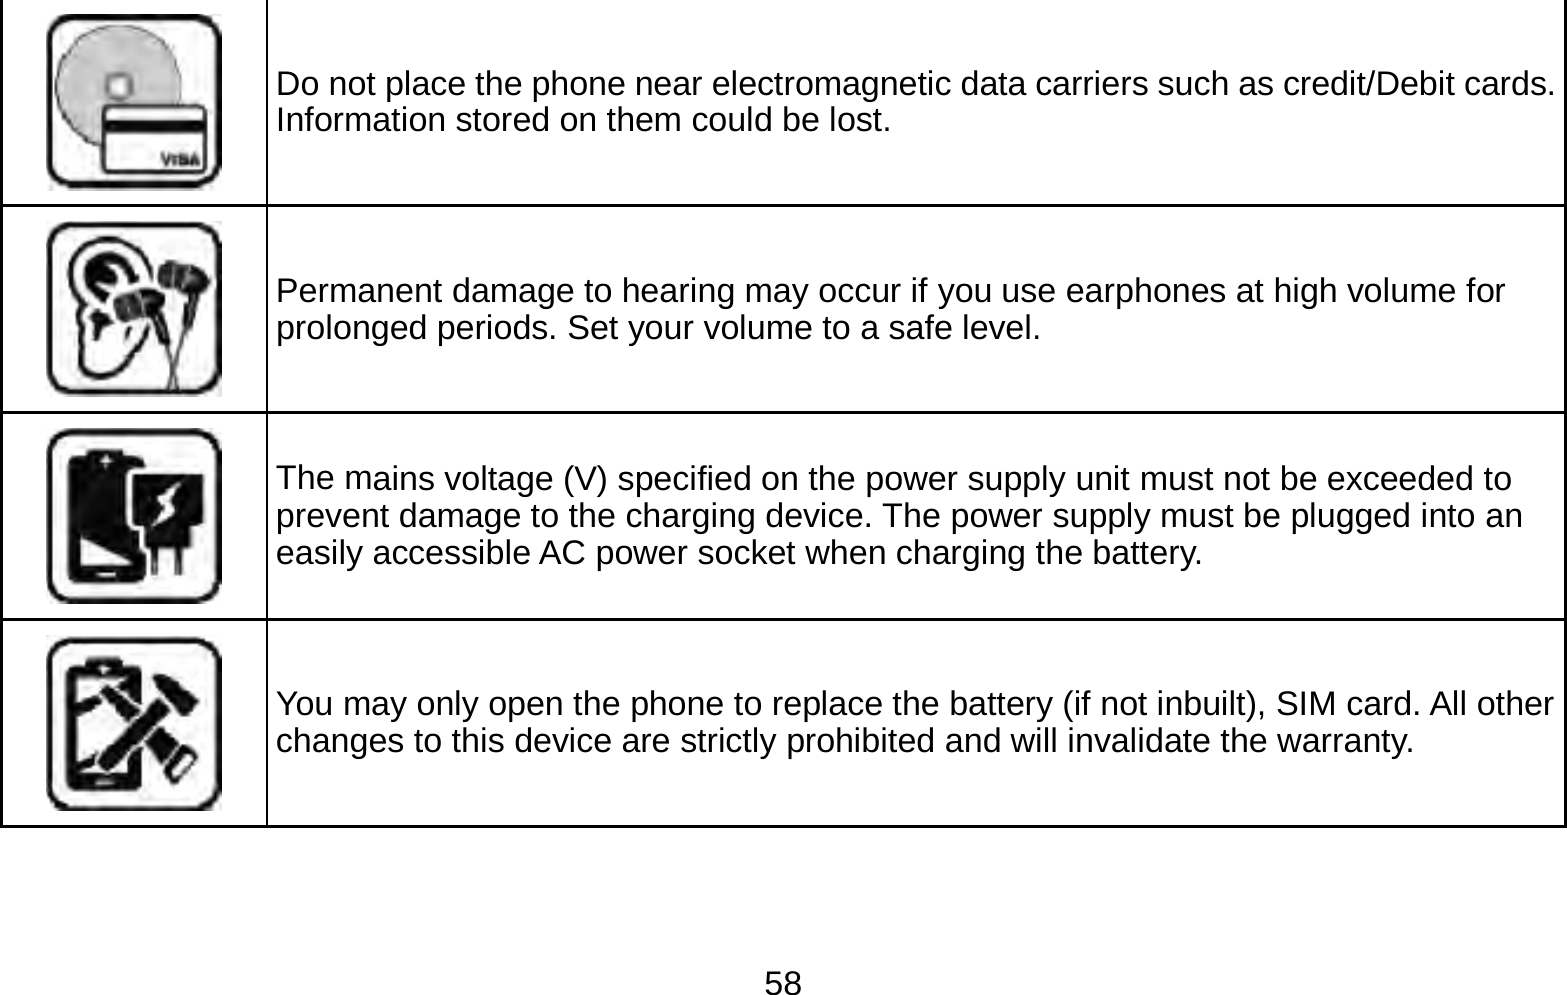   58 Do not place the phone near electromagnetic data carriers such as credit/Debit cards. Information stored on them could be lost.  Permanent damage to hearing may occur if you use earphones at high volume for prolonged periods. Set your volume to a safe level.  The mains voltage (V) specified on the power supply unit must not be exceeded to prevent damage to the charging device. The power supply must be plugged into an easily accessible AC power socket when charging the battery.  You may only open the phone to replace the battery (if not inbuilt), SIM card. All other changes to this device are strictly prohibited and will invalidate the warranty. 